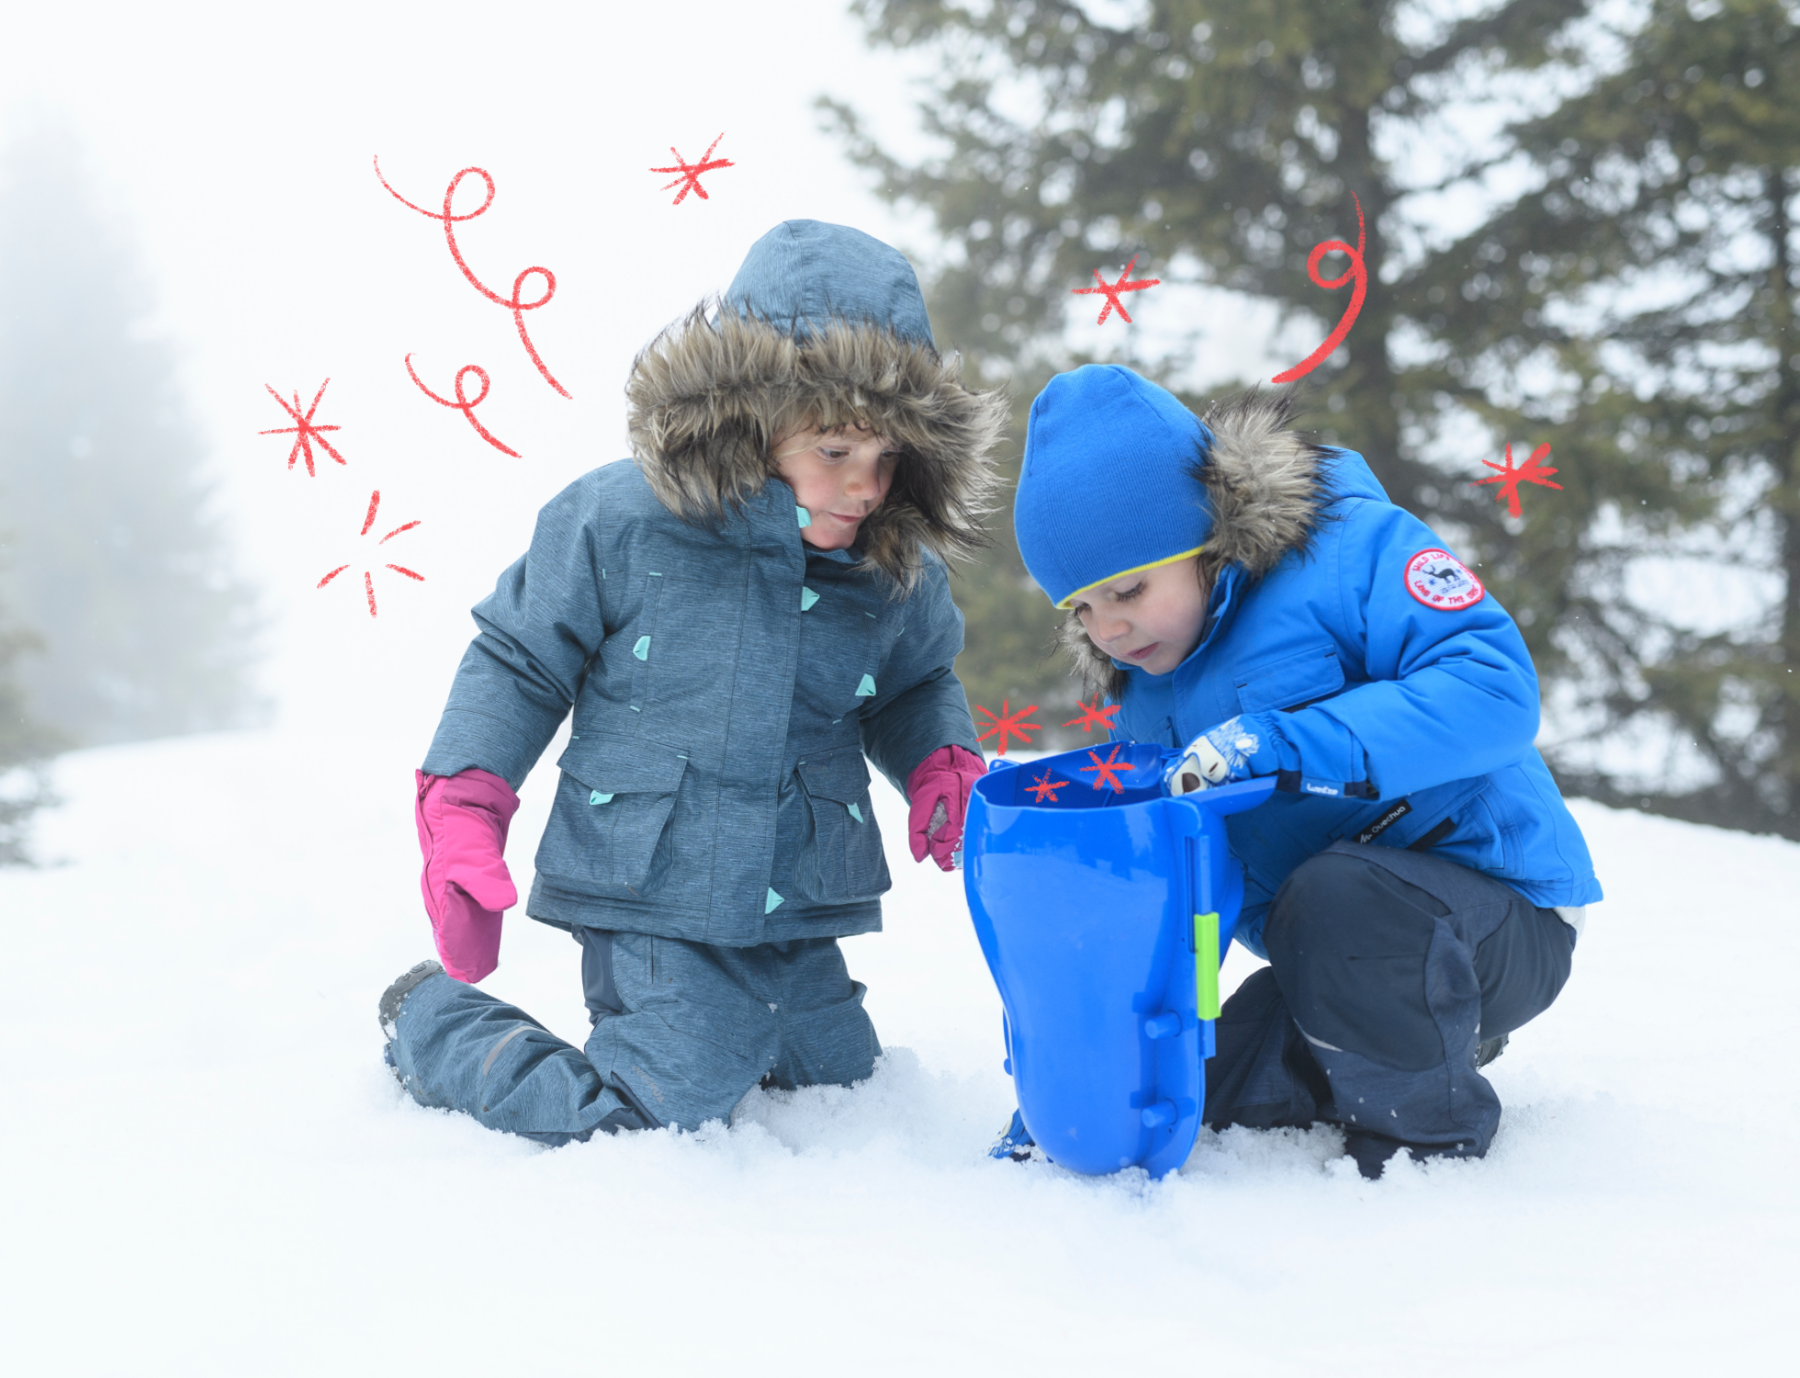 7 activities for the snow for children from the age of 1